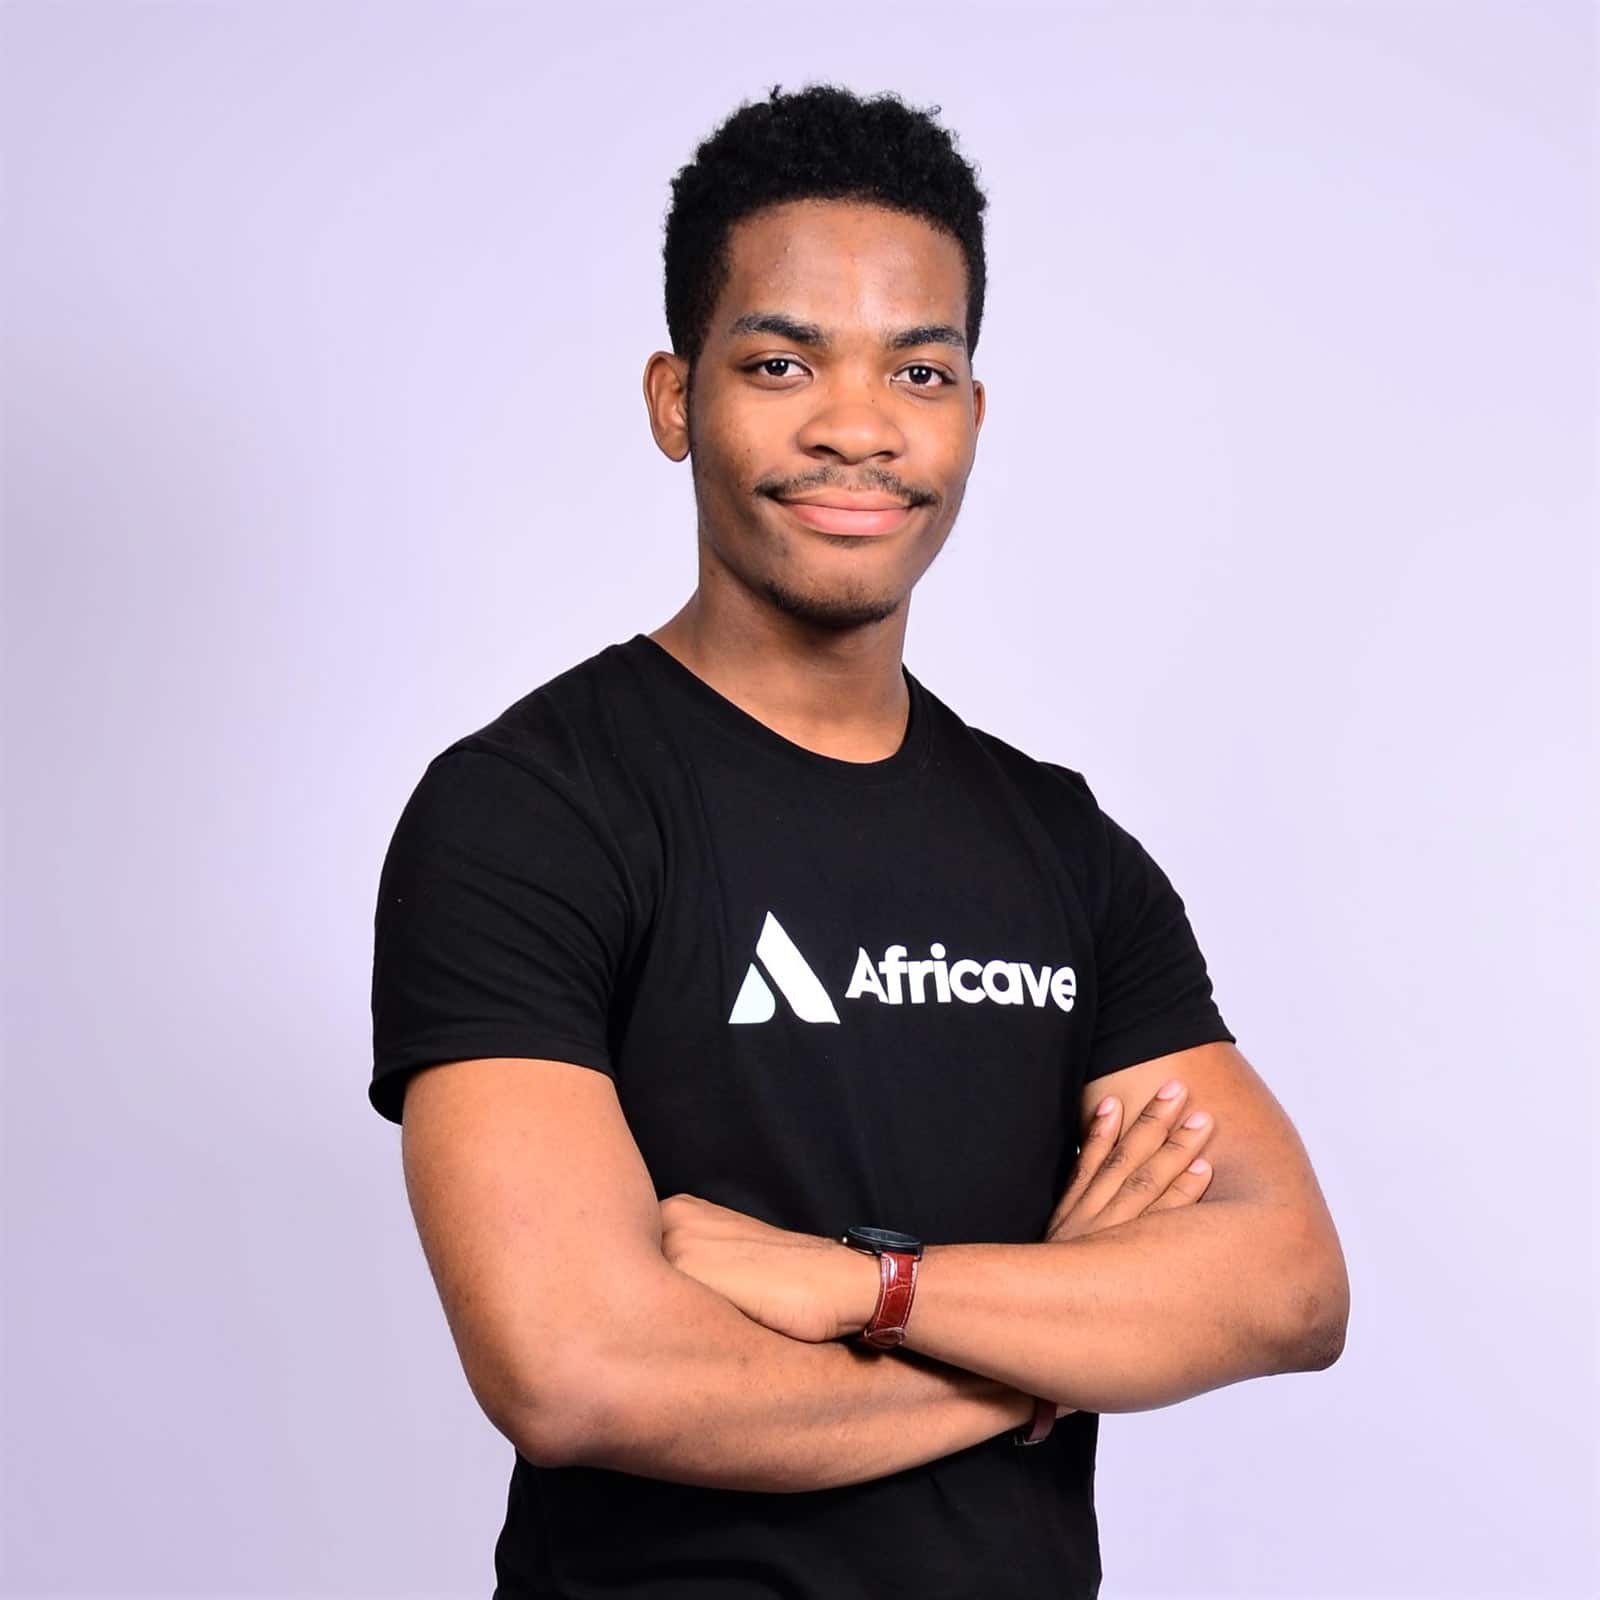 Africave CEO